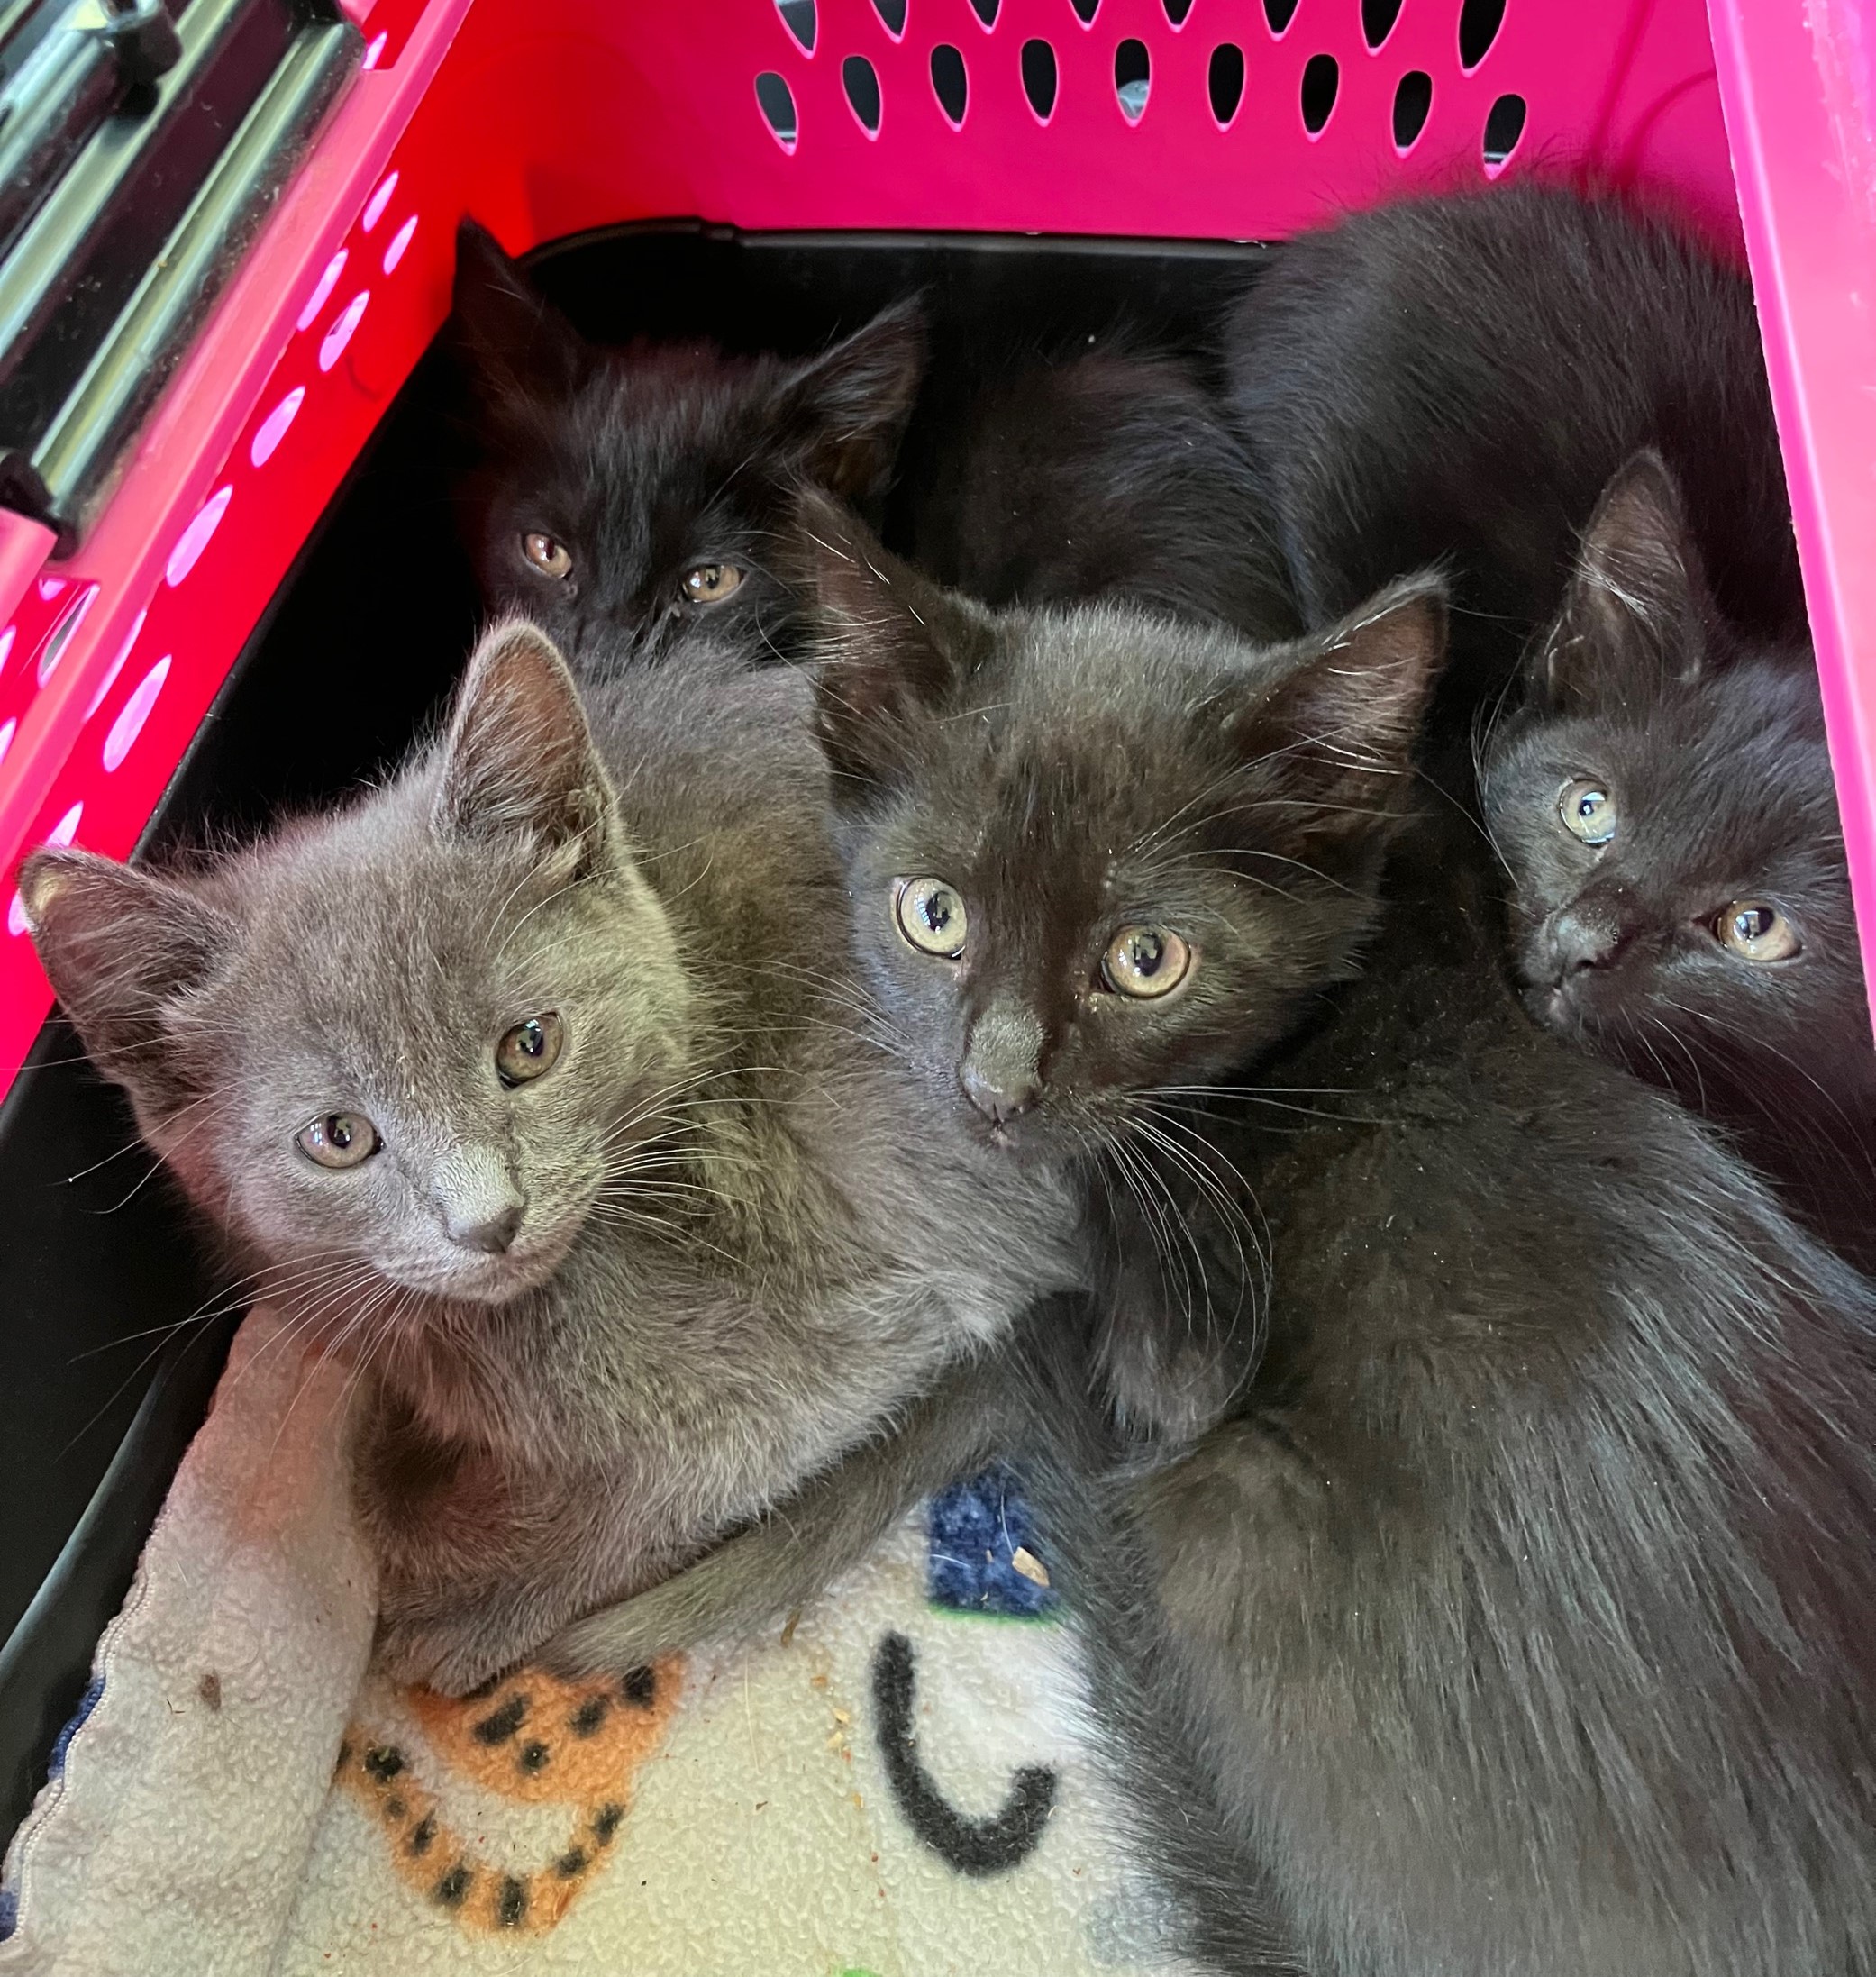 four kittens cuddled together in a pink crate